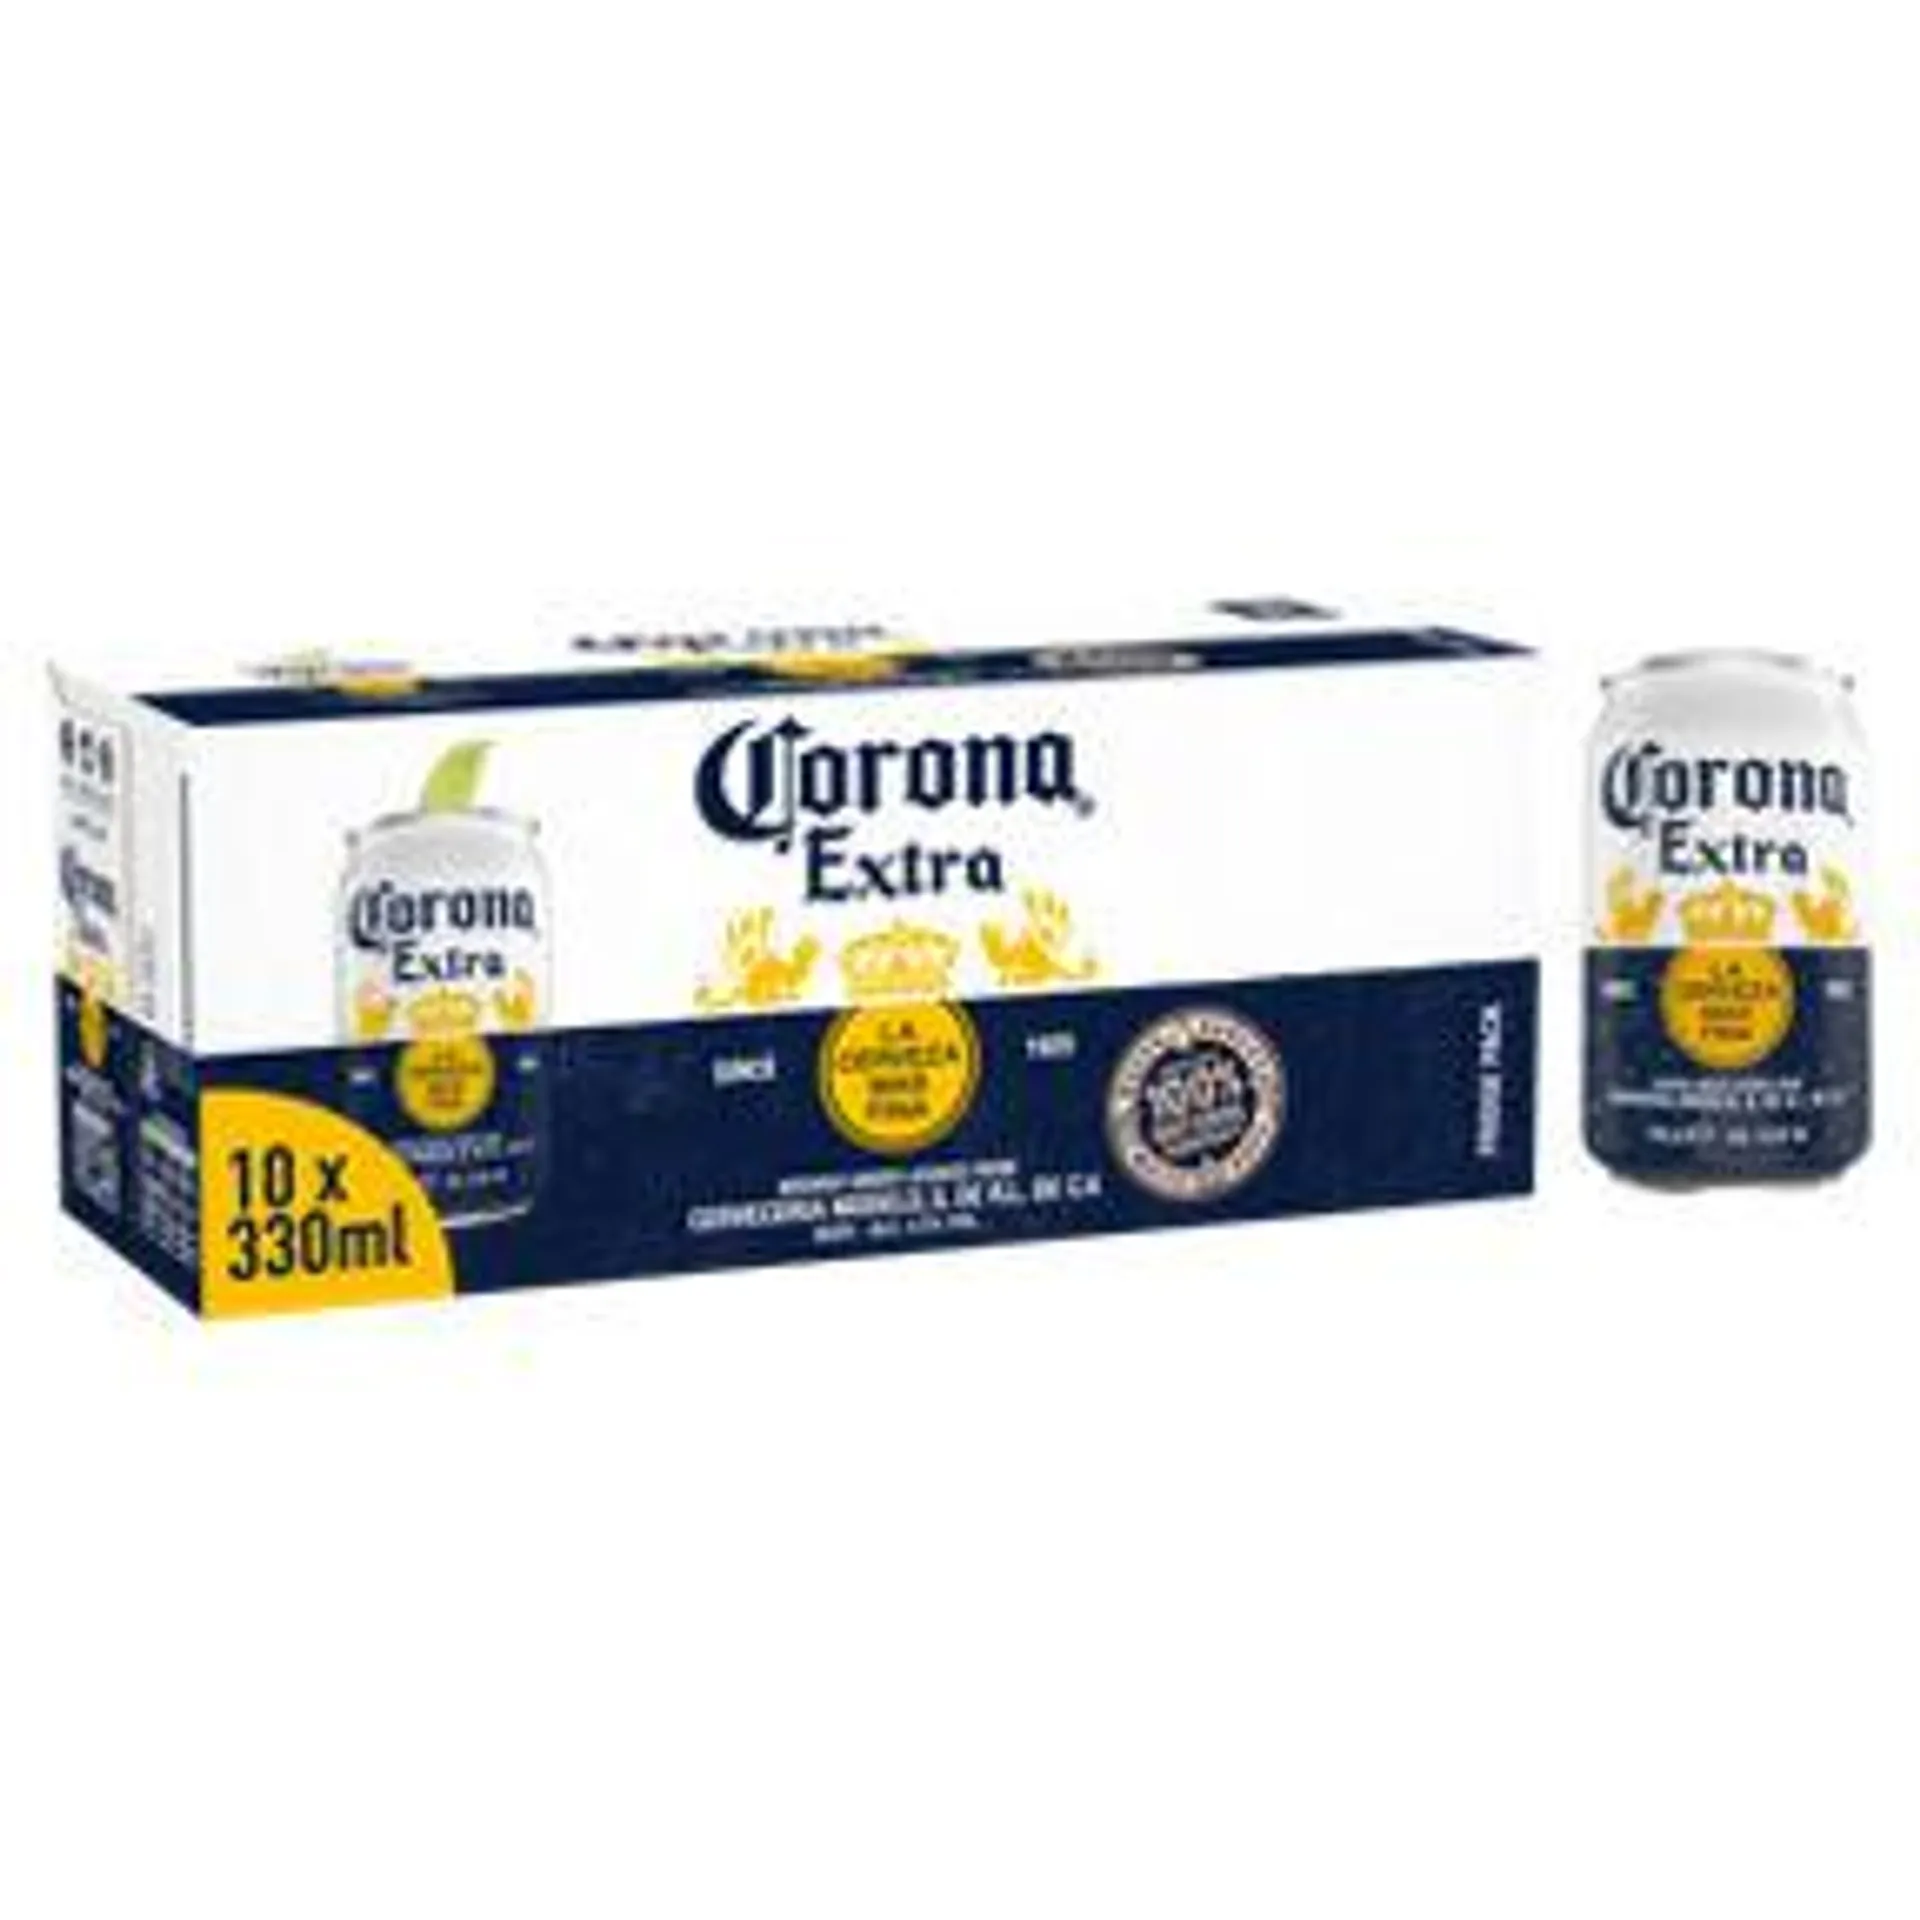 Corona Extra Premium Lager Beer Cans